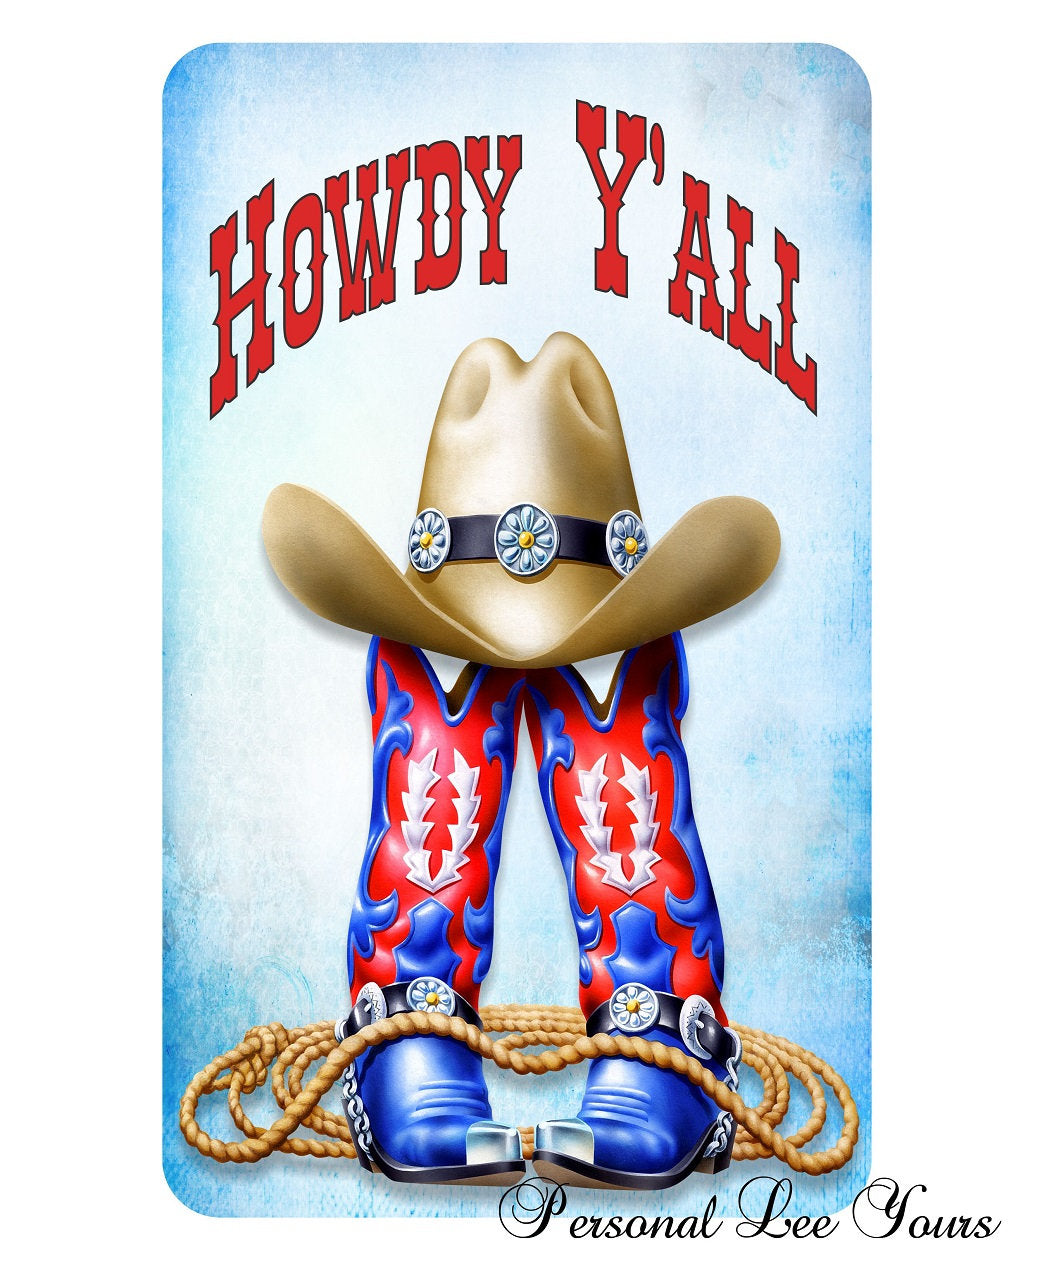 Wreath Sign * Howdy Y'all * 3 Sizes * Lightweight Metal